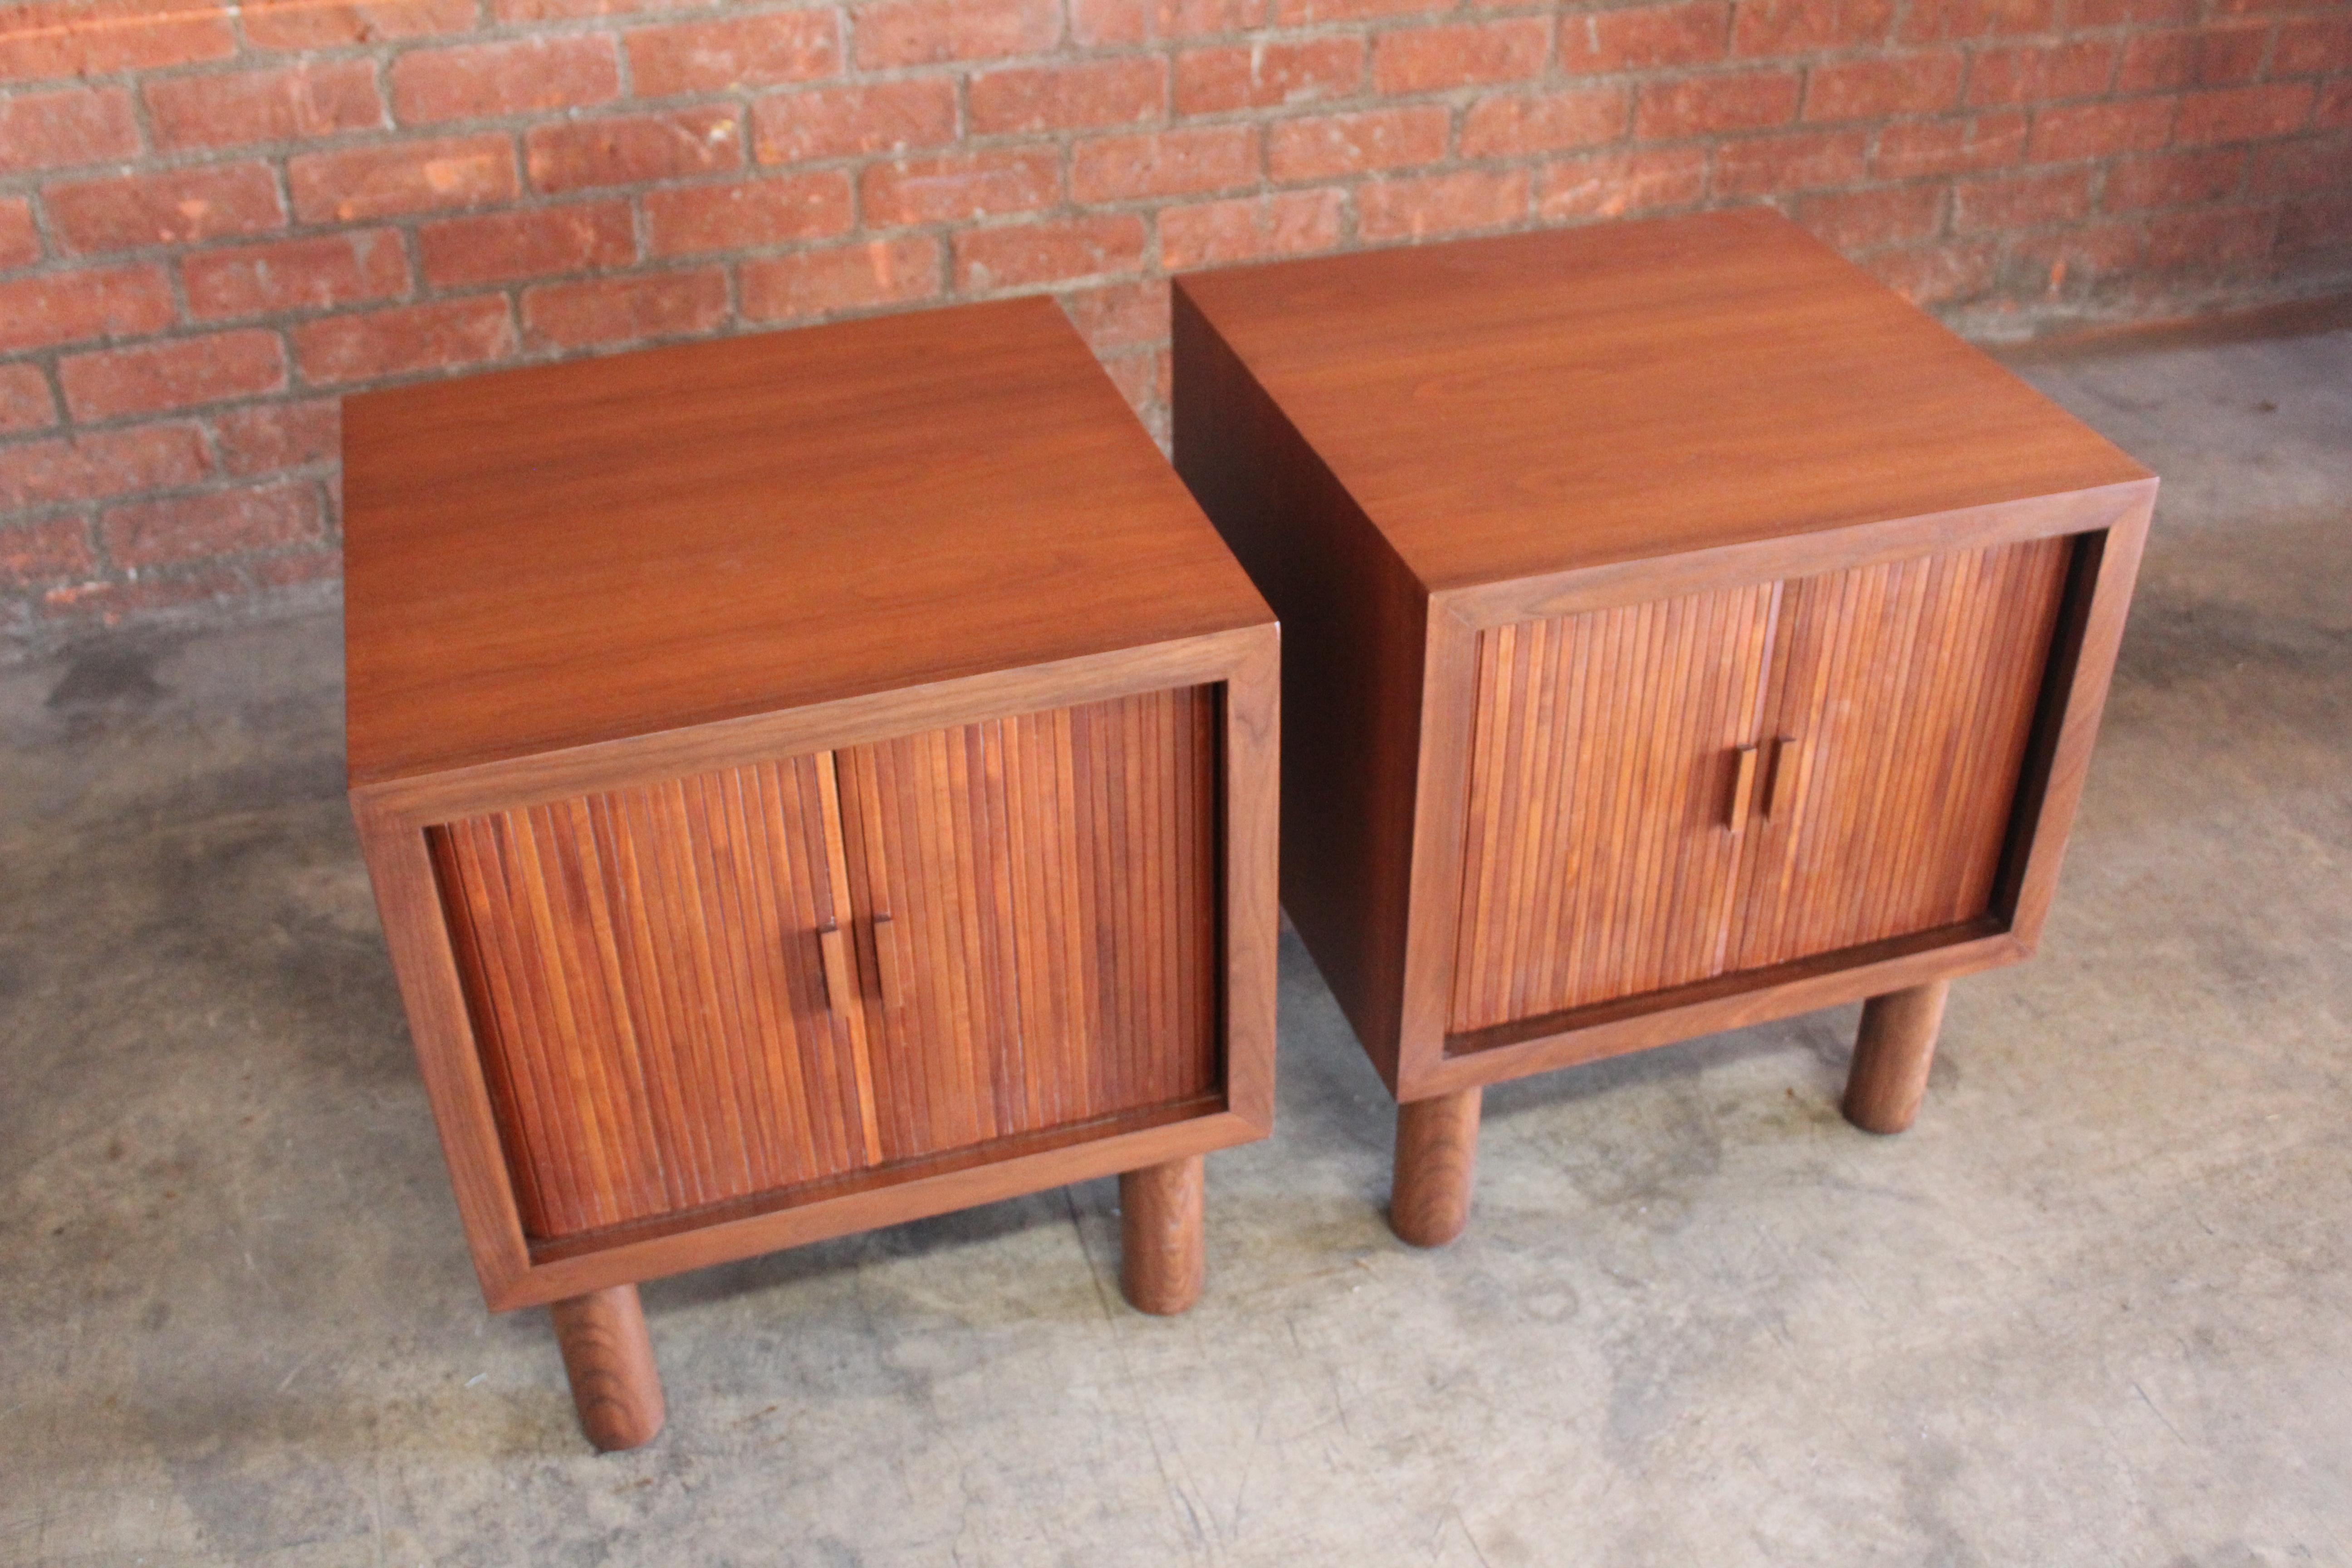 Pair of 1960s walnut nightstands with tambour doors. They have been refinished. 
The backs of the nightstands have some veneer repairs.